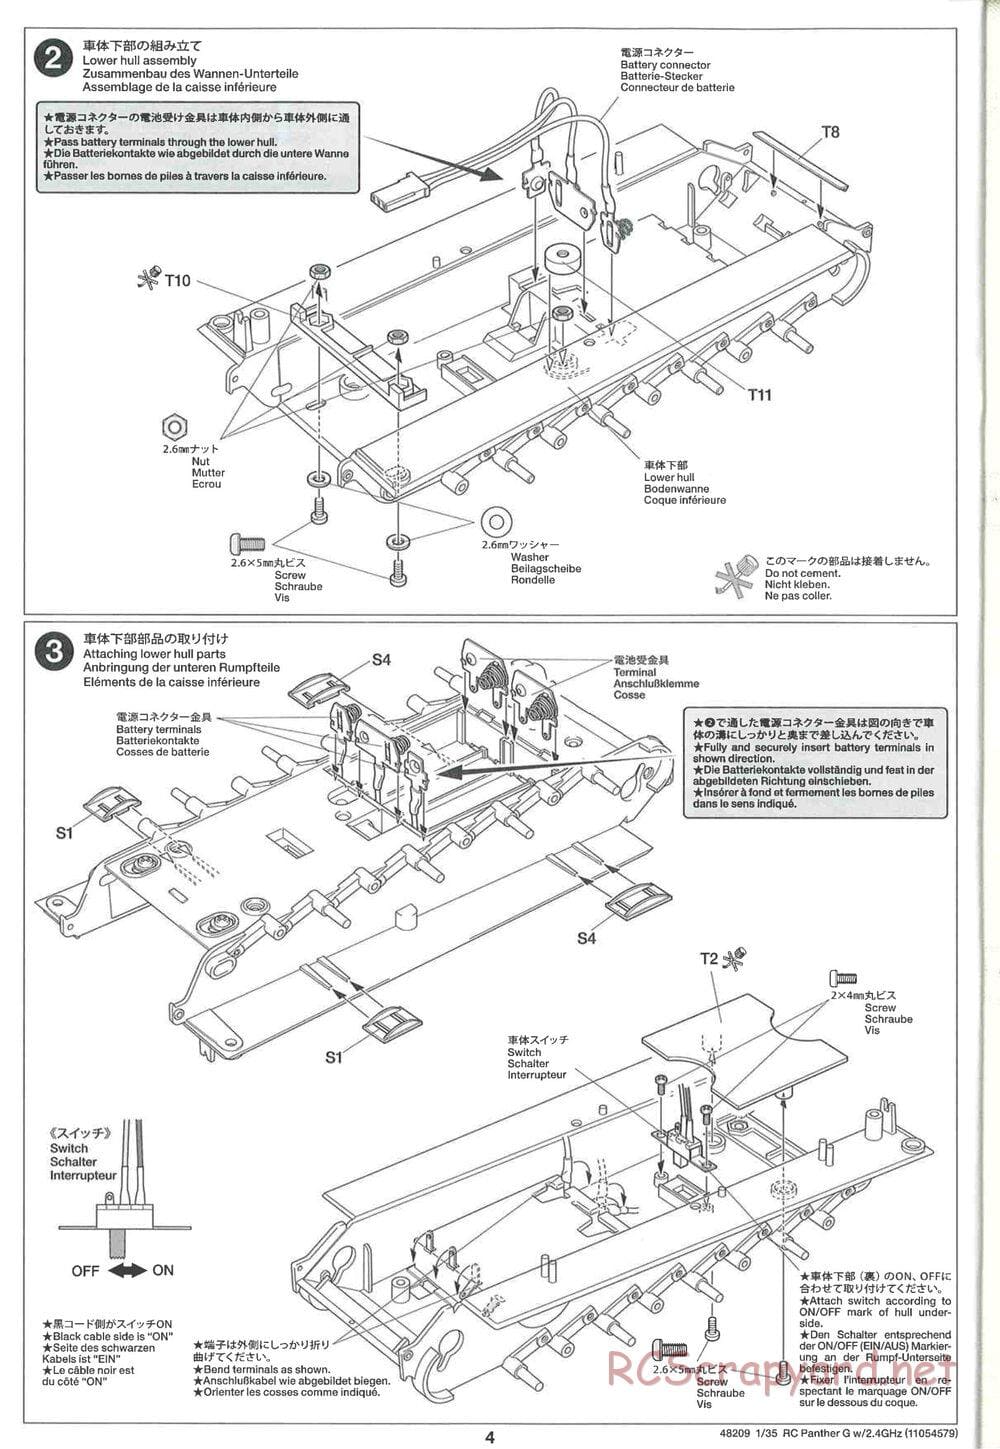 Tamiya - German Panther Type G - Late Version - 1/35 Scale Chassis - Manual - Page 4